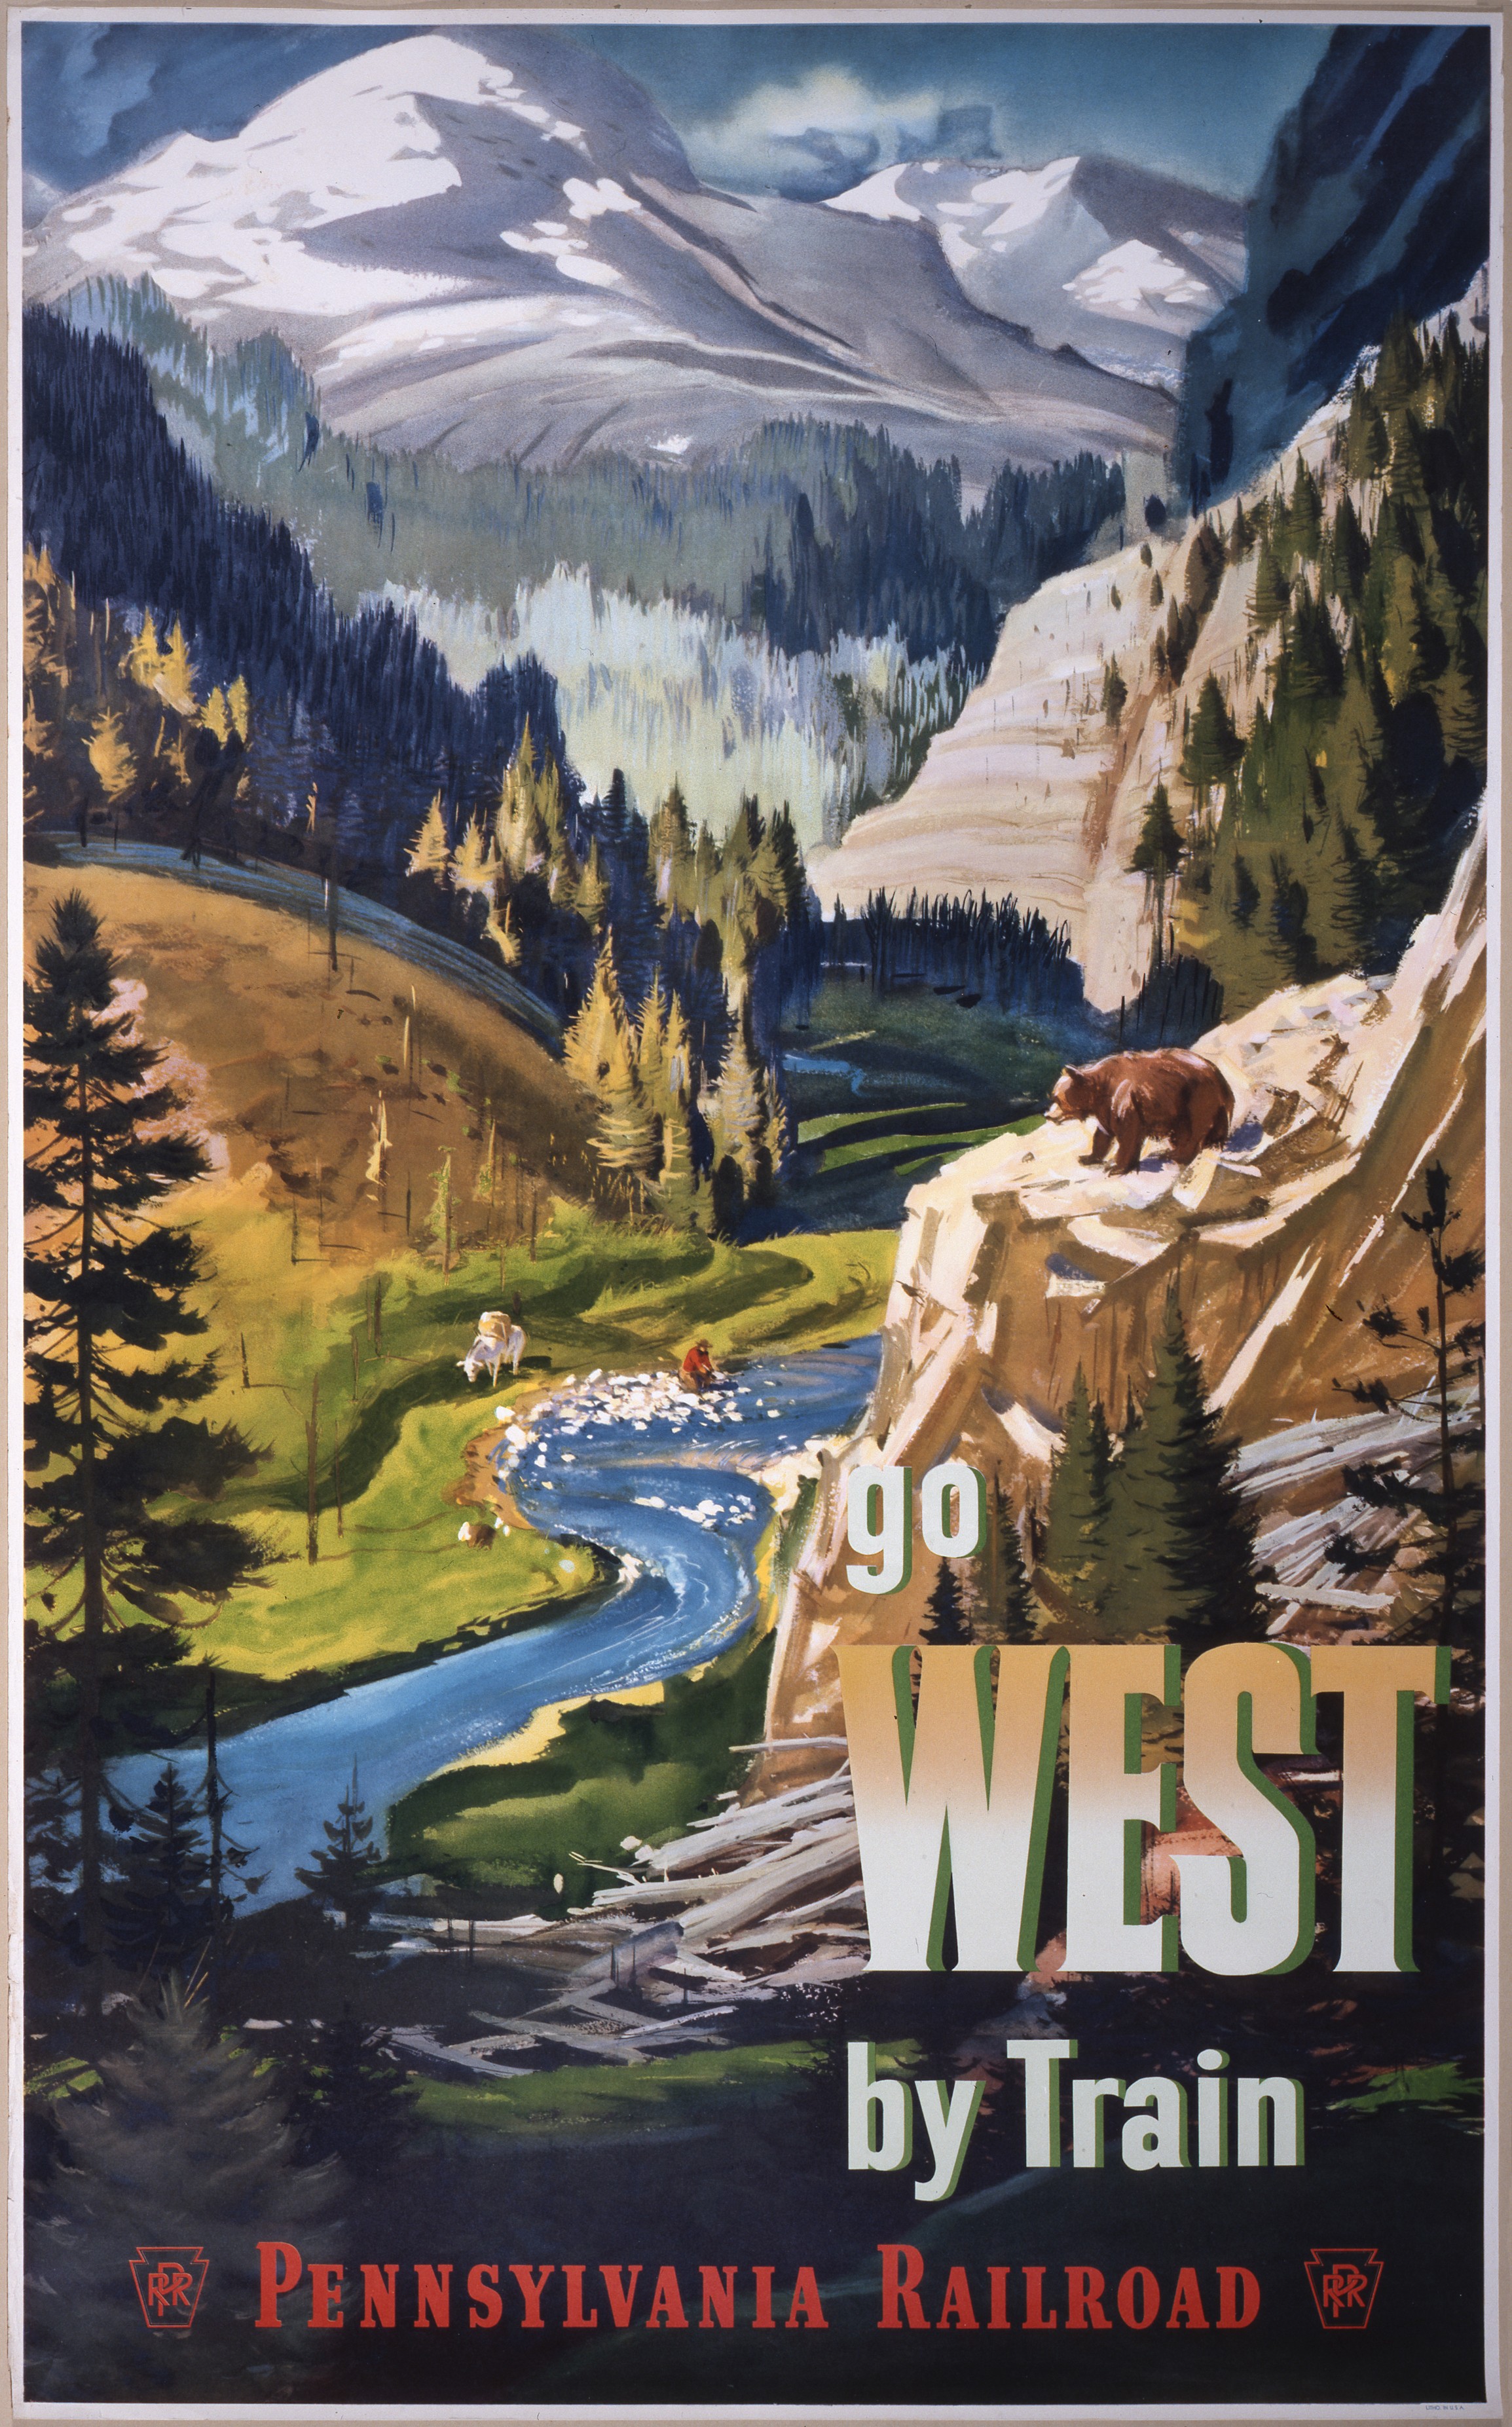 Scenic color illustration of a Western landscape with the text "go WEST by Train" and PRR branding. 